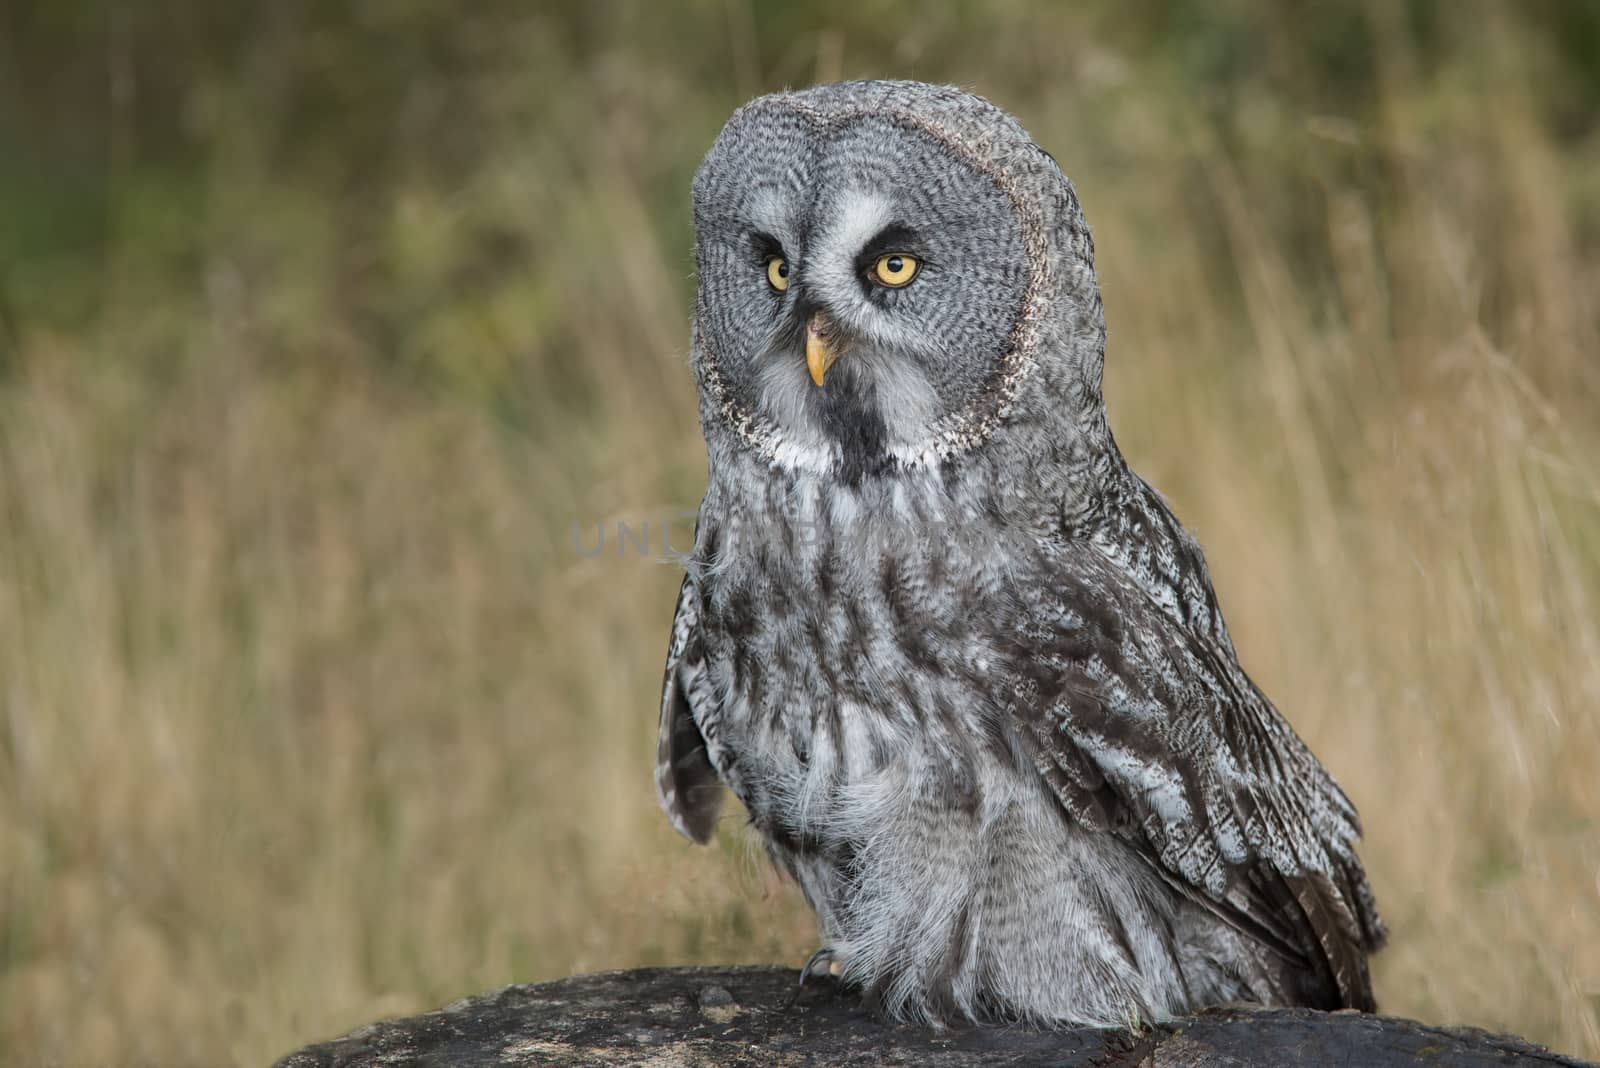 A close image of a great grey gray owl standing on a rock facing slightly left against a natural background